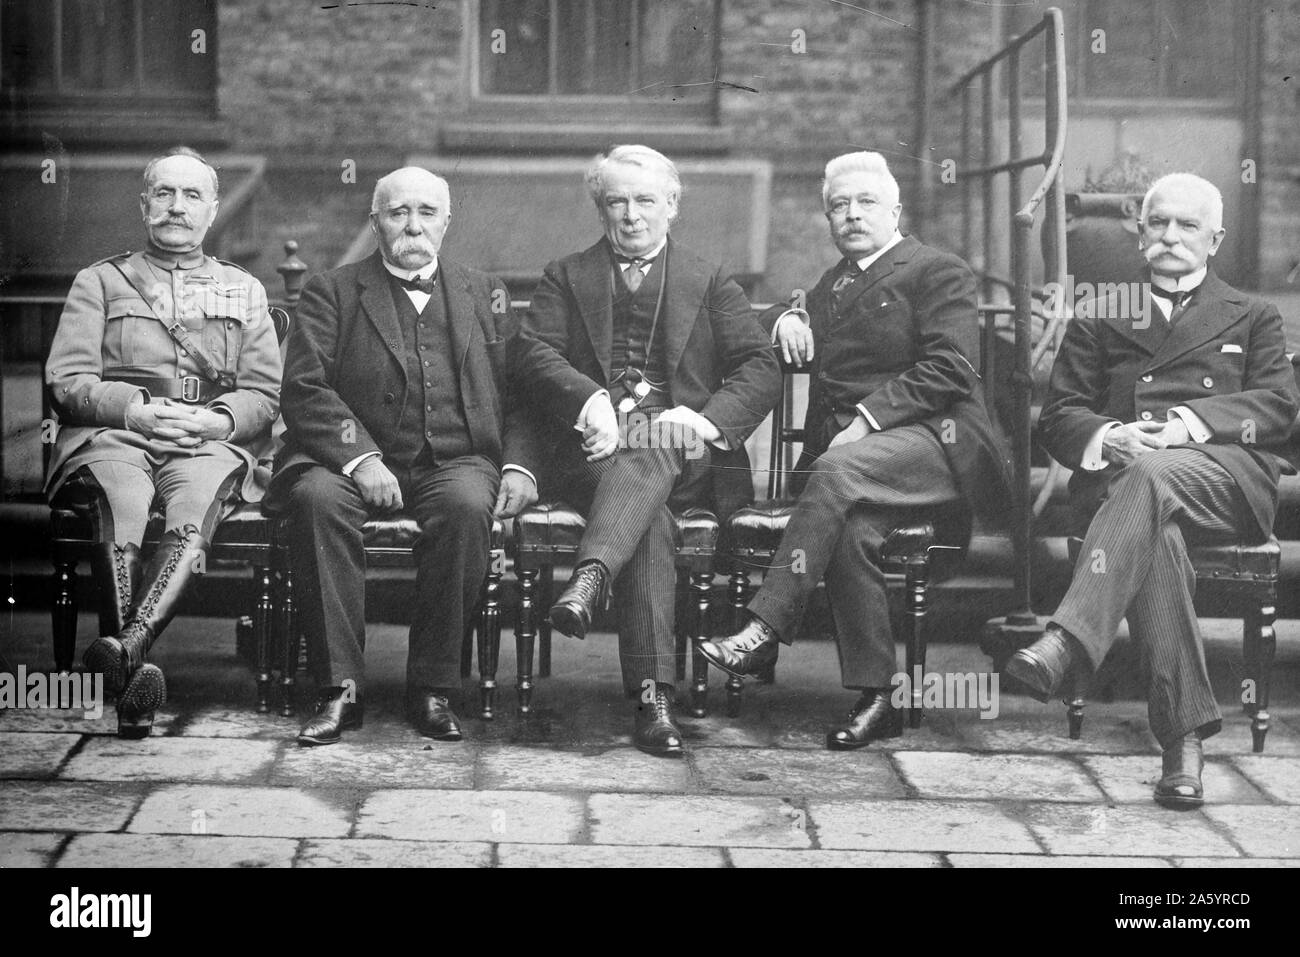 Photograph shows French General Ferdinand Foch (1851-1929), French Prime Minister Georges Benjamin Clemenceau (1841-1929), British Prime Minister David Lloyd George (1863-1945), Italian Prime Minister Vittorio Emanuele Orlando (1860-1952) and Italian Minister of Foreign Affairs Baron Sidney Costantino Sonnino (1847-1922). 1918 Stock Photo